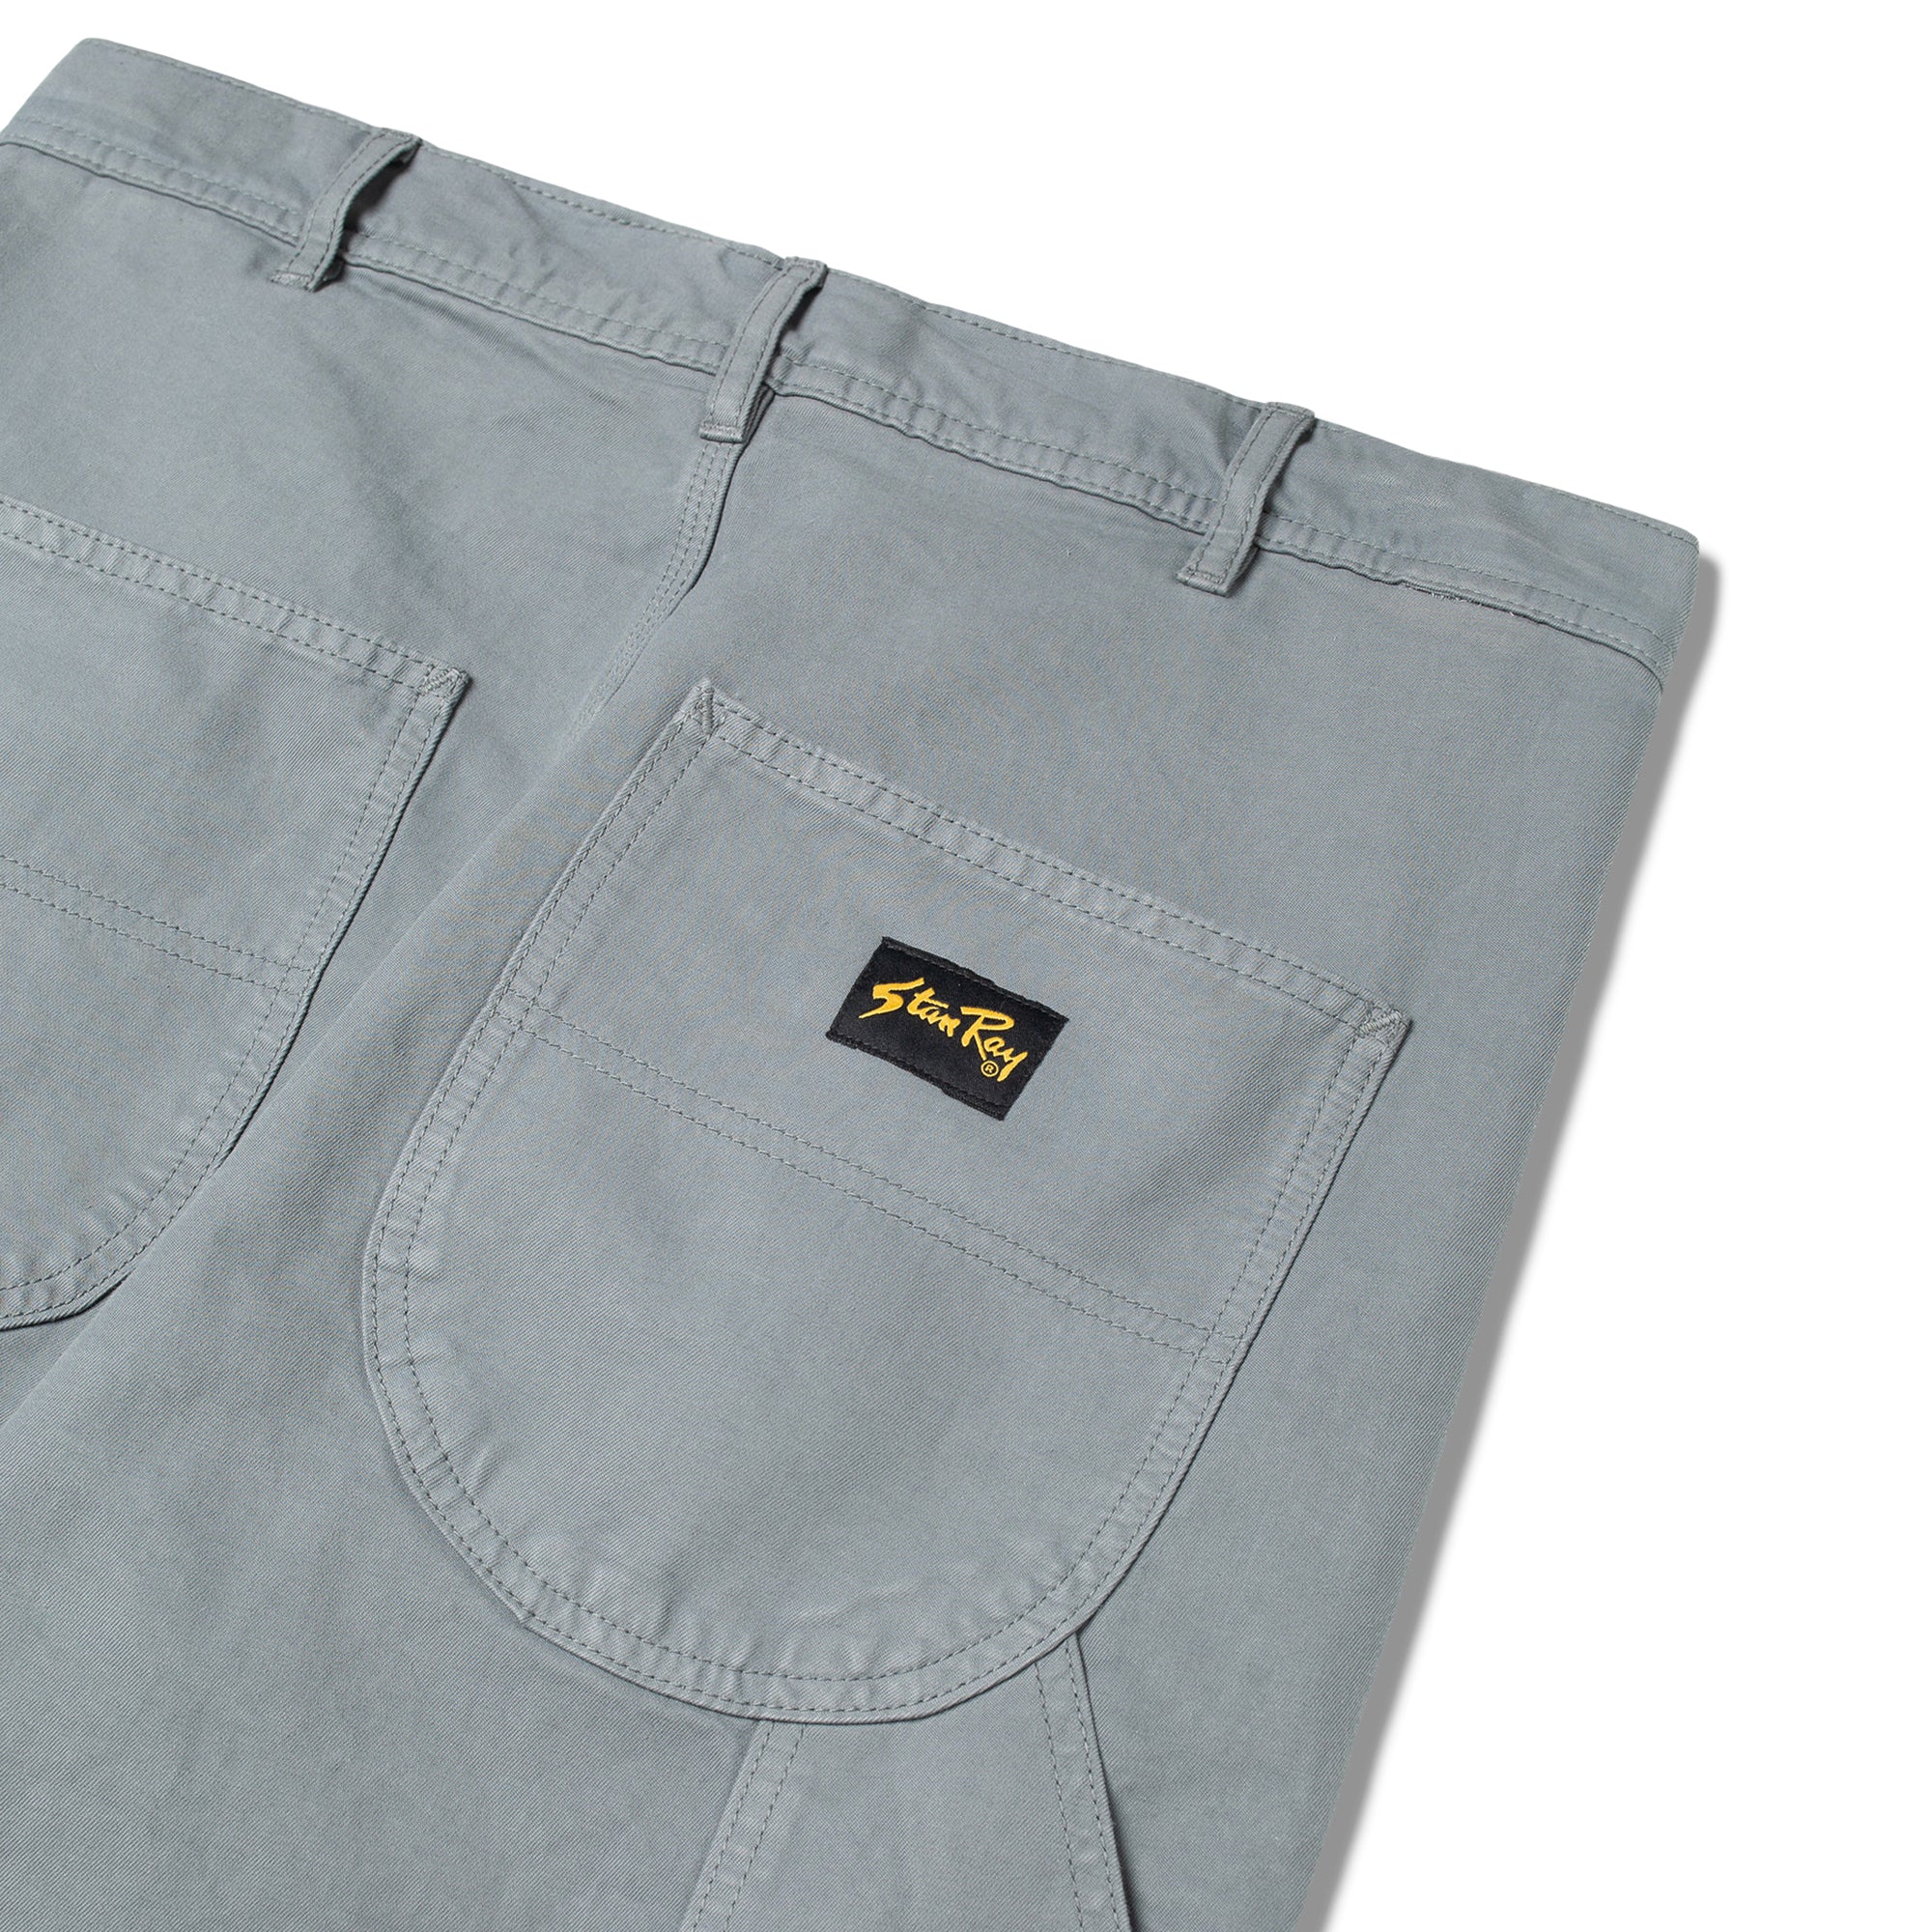 Stan Ray 80s Painter Pant - Battle Grey Twill